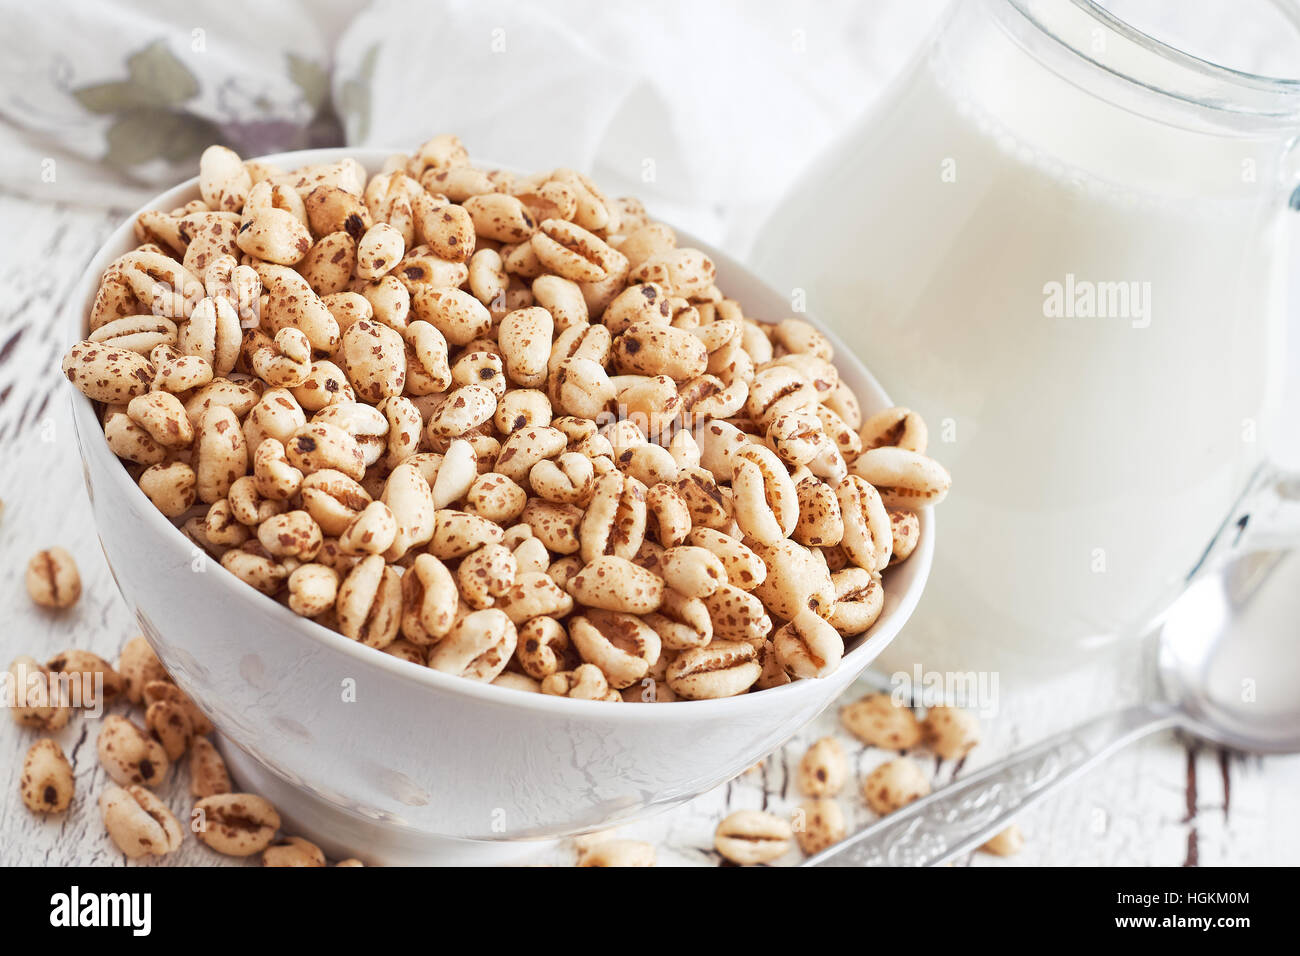 Puffed wheat cereal in white bowl with pitcher of milk in background Stock Photo